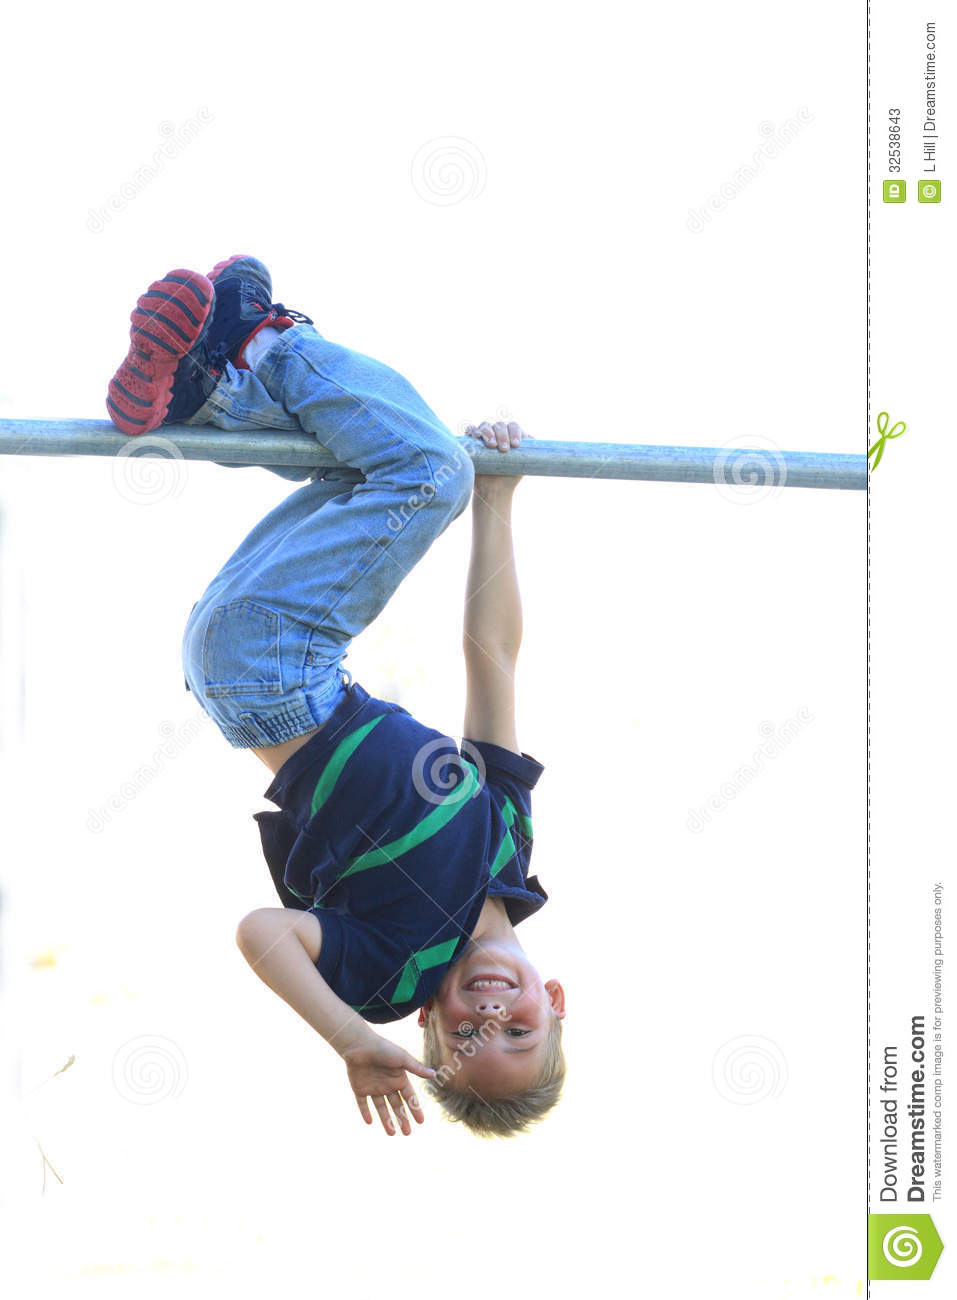 Young Boy Hanging From A Bar Upside Down Smiling And Waving 